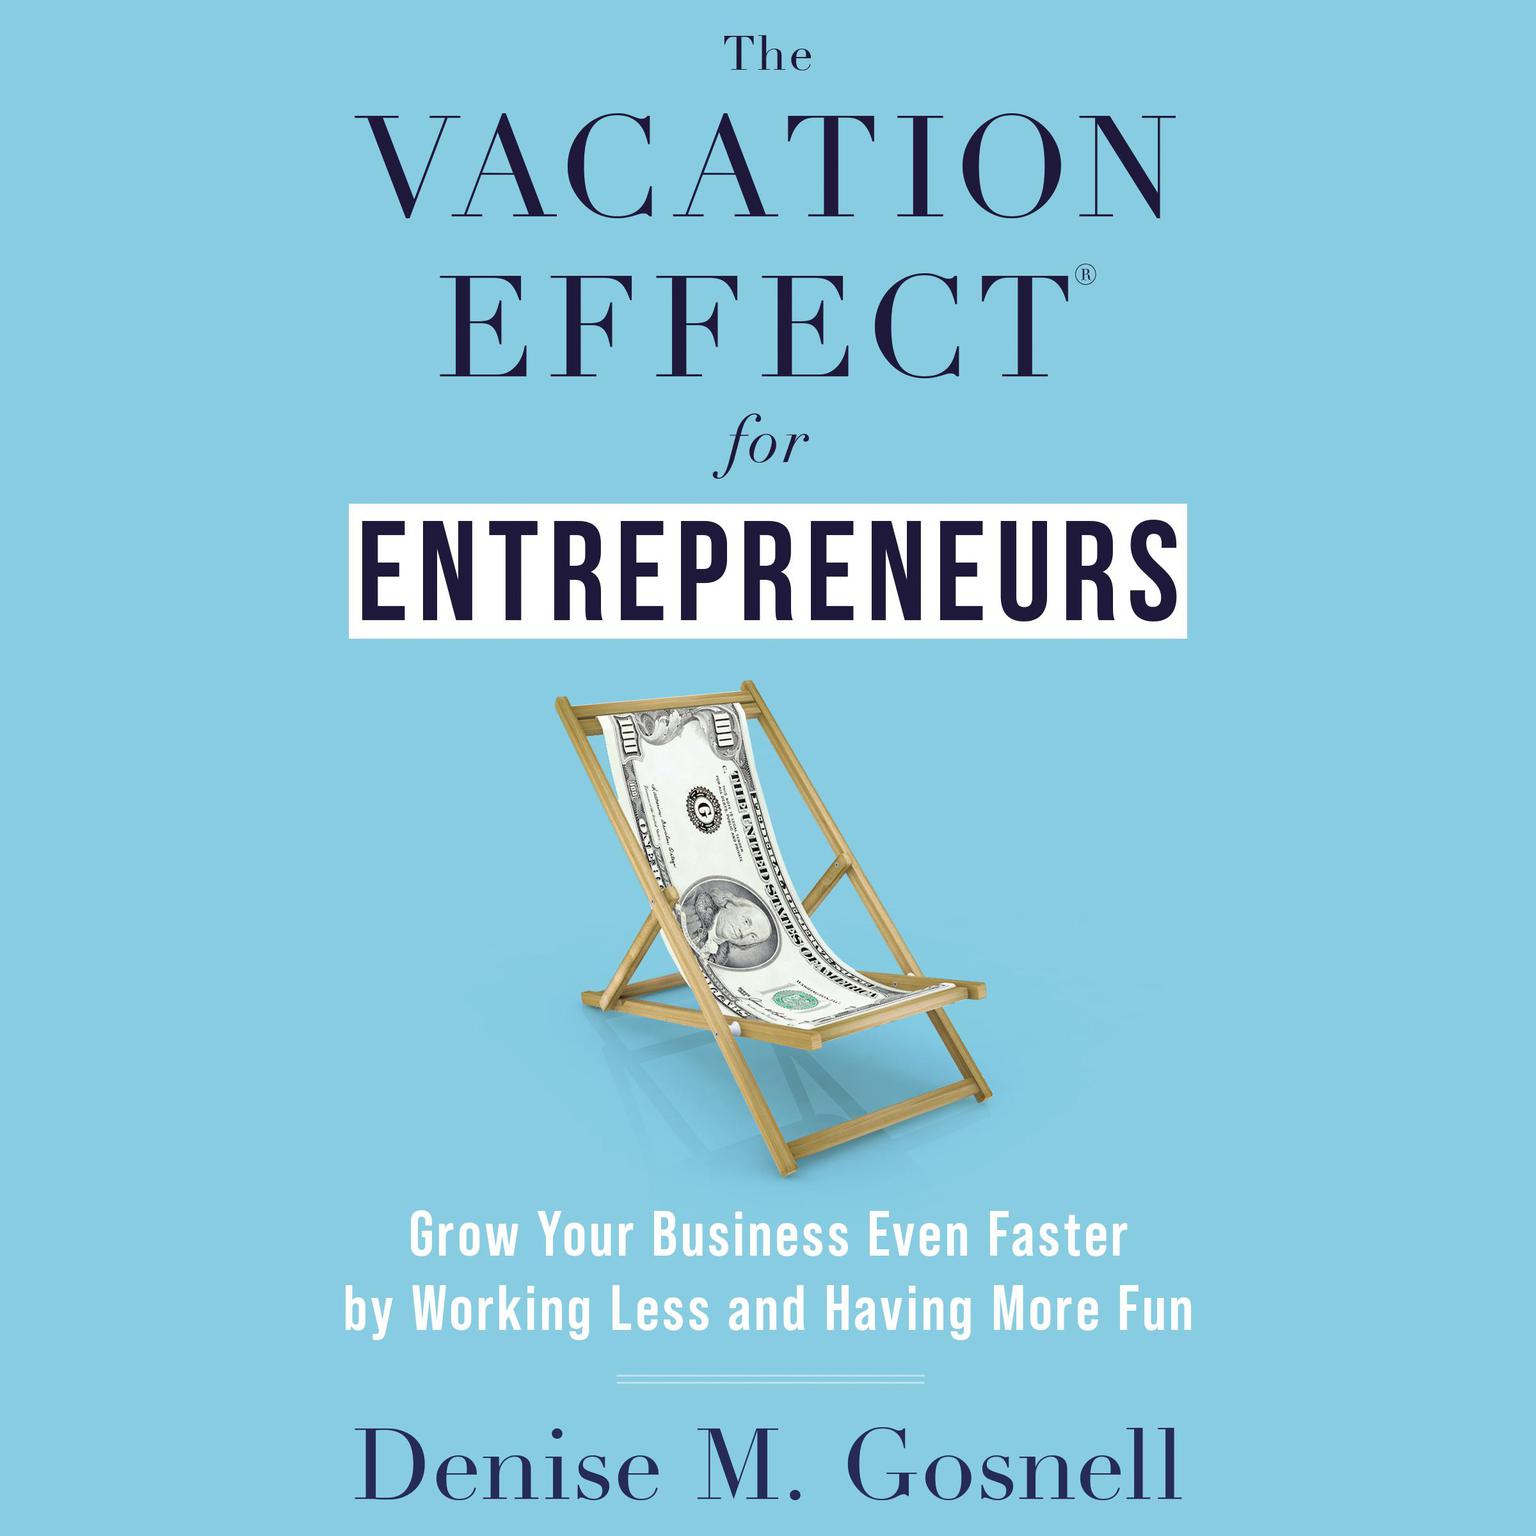 The Vacation Effect® for Entrepreneurs Audiobook, by Denise M. Gosnell